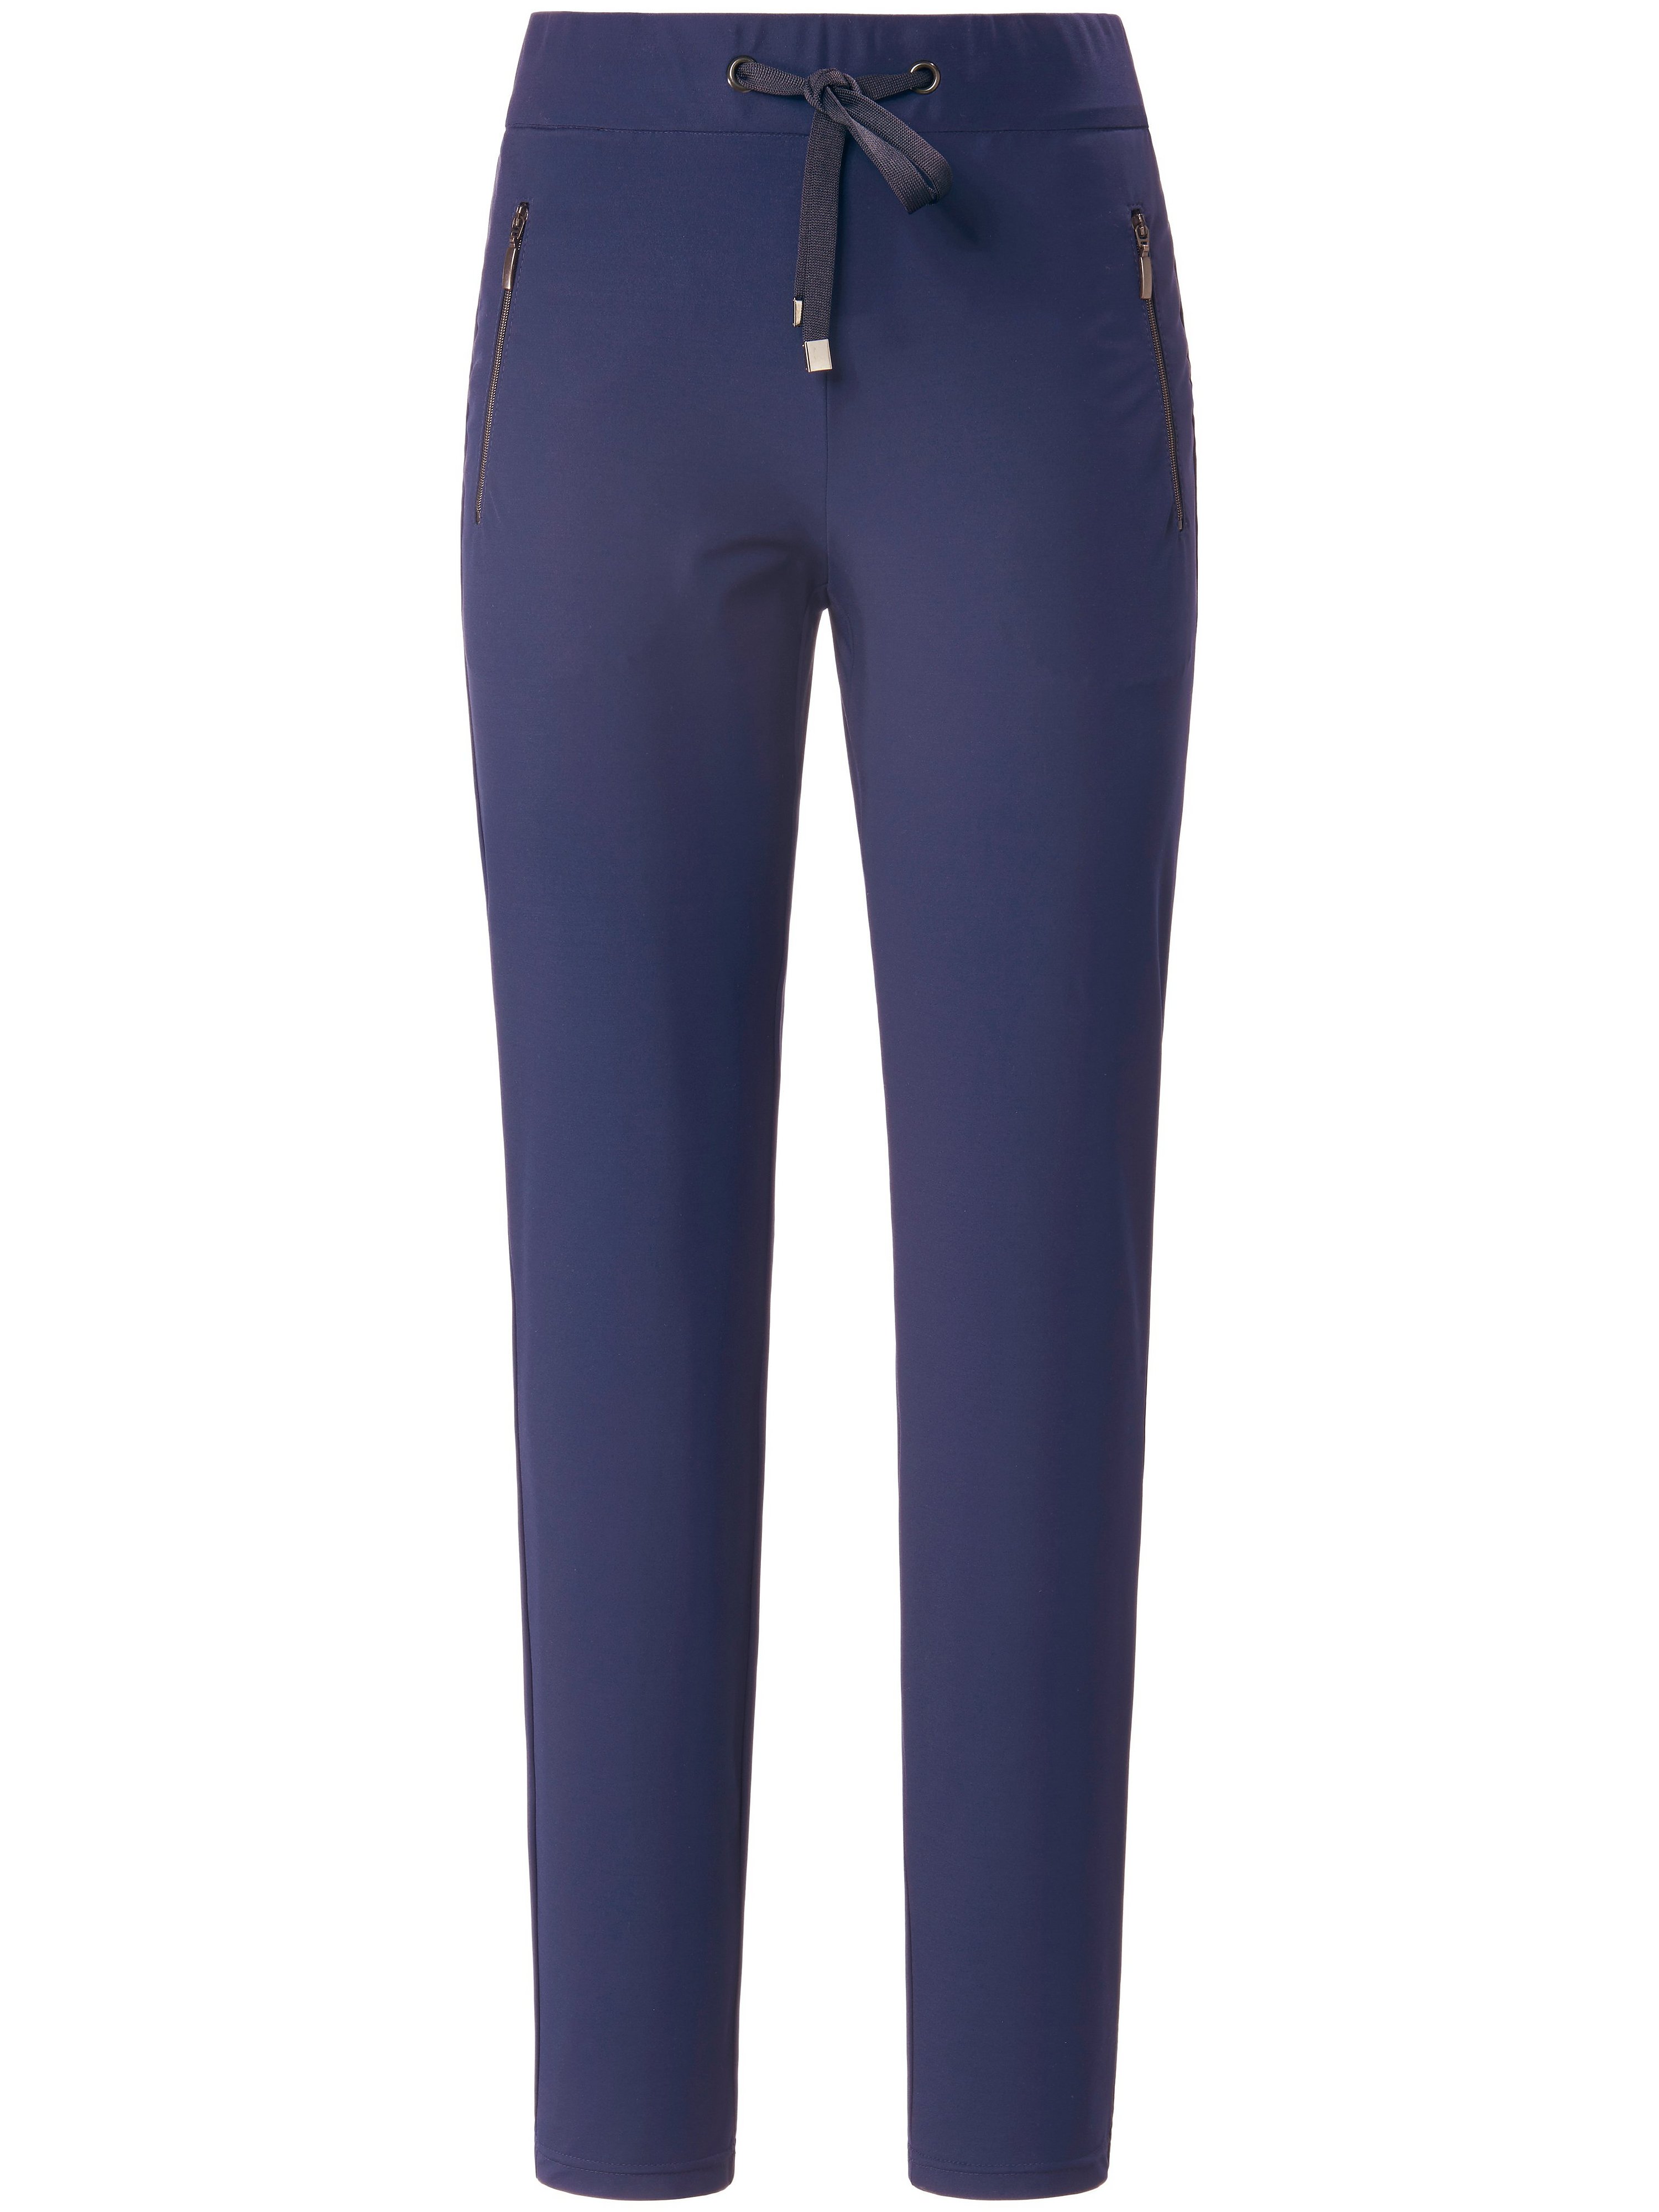 Jogger style trousers Barbara fit Peter Hahn blue